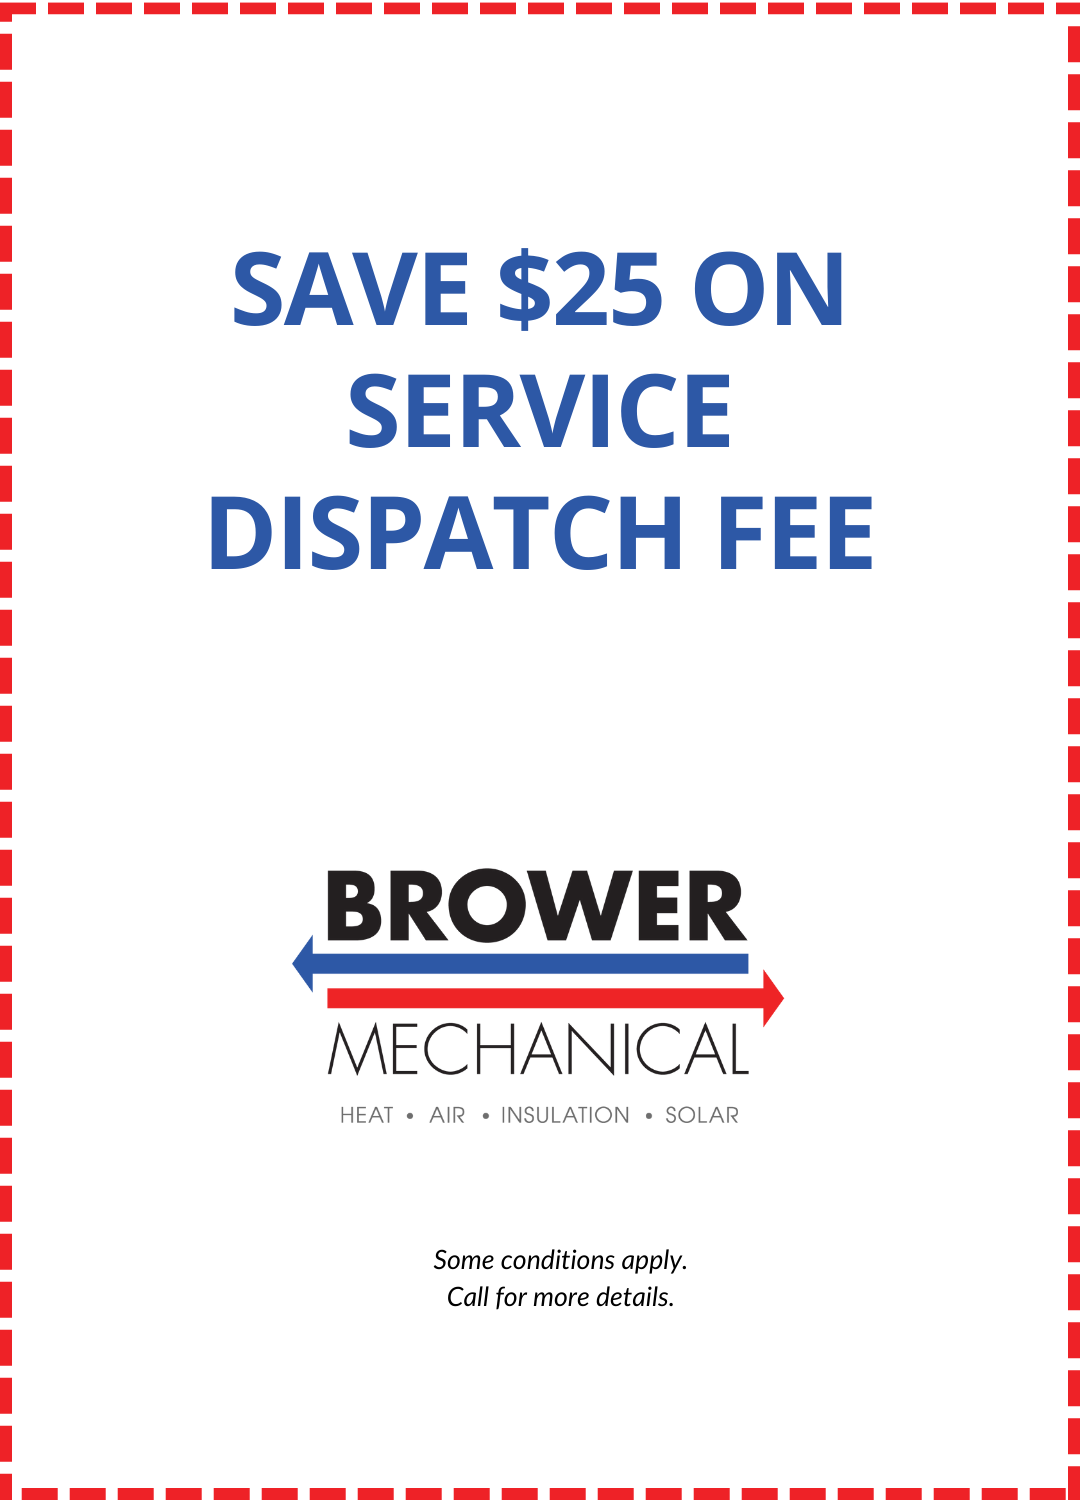 Brower Special Save $25 on Service Dispatch Fee